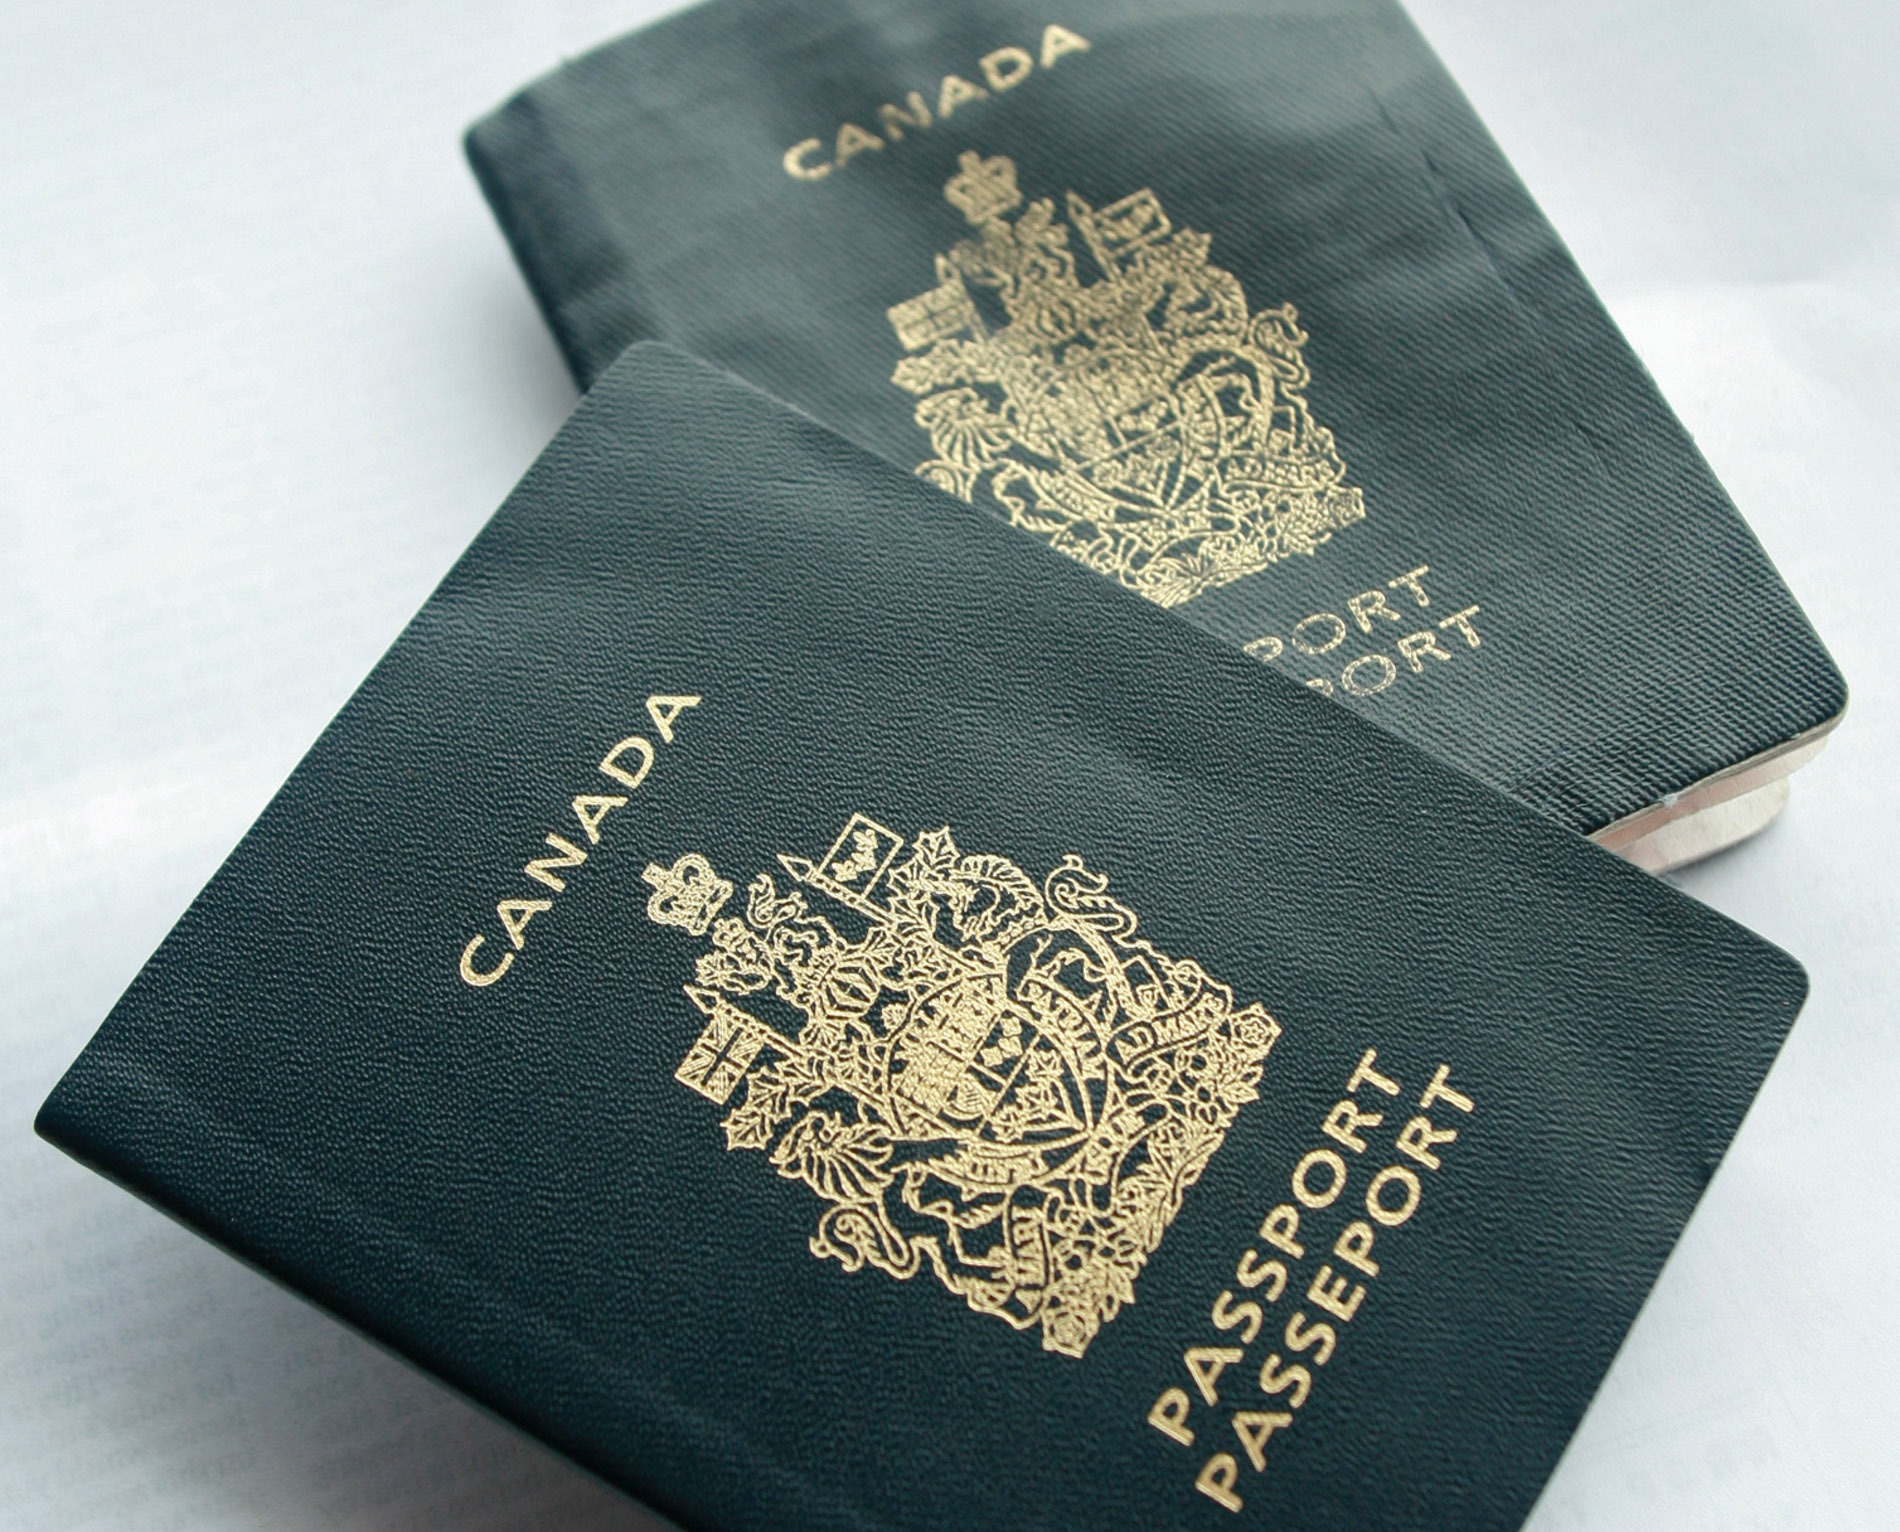 Canadian passports are arranged for a photograph in Big Whit